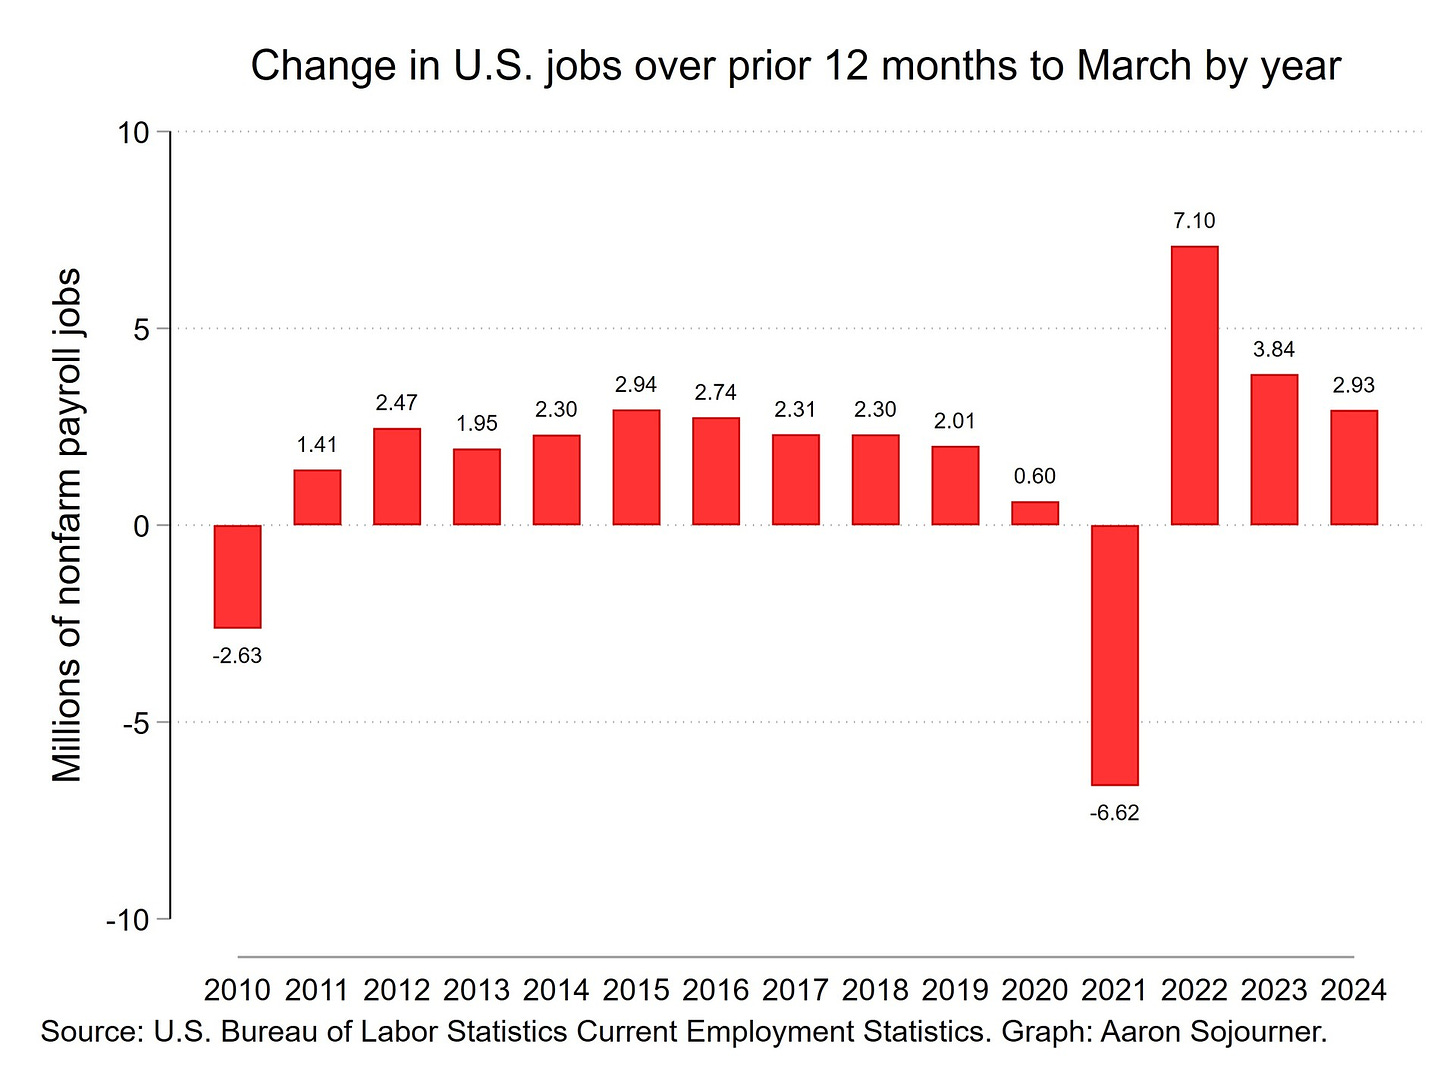 Photo by Aaron Sojourner on April 05, 2024. May be an image of text that says '10 Change in U.S. jobs over prior 12 months to March by year sods 5- 7.10 2.47 1.41 2.94 1.95 2.30 2.74 2.31 2.30 ................ 3.84 2.01 mл a nonfarm of Millions -5 2.93 0.60 -2.63 -10 -6.62 2010 2011 2012 2013 2014 2015 2016 2017 2018 2019 2020 2021 2022 2023 2024 Source: U.S. Bureau of Labor Statistics Current Employment Statistics. Graph: Aaron Sojourner.'.